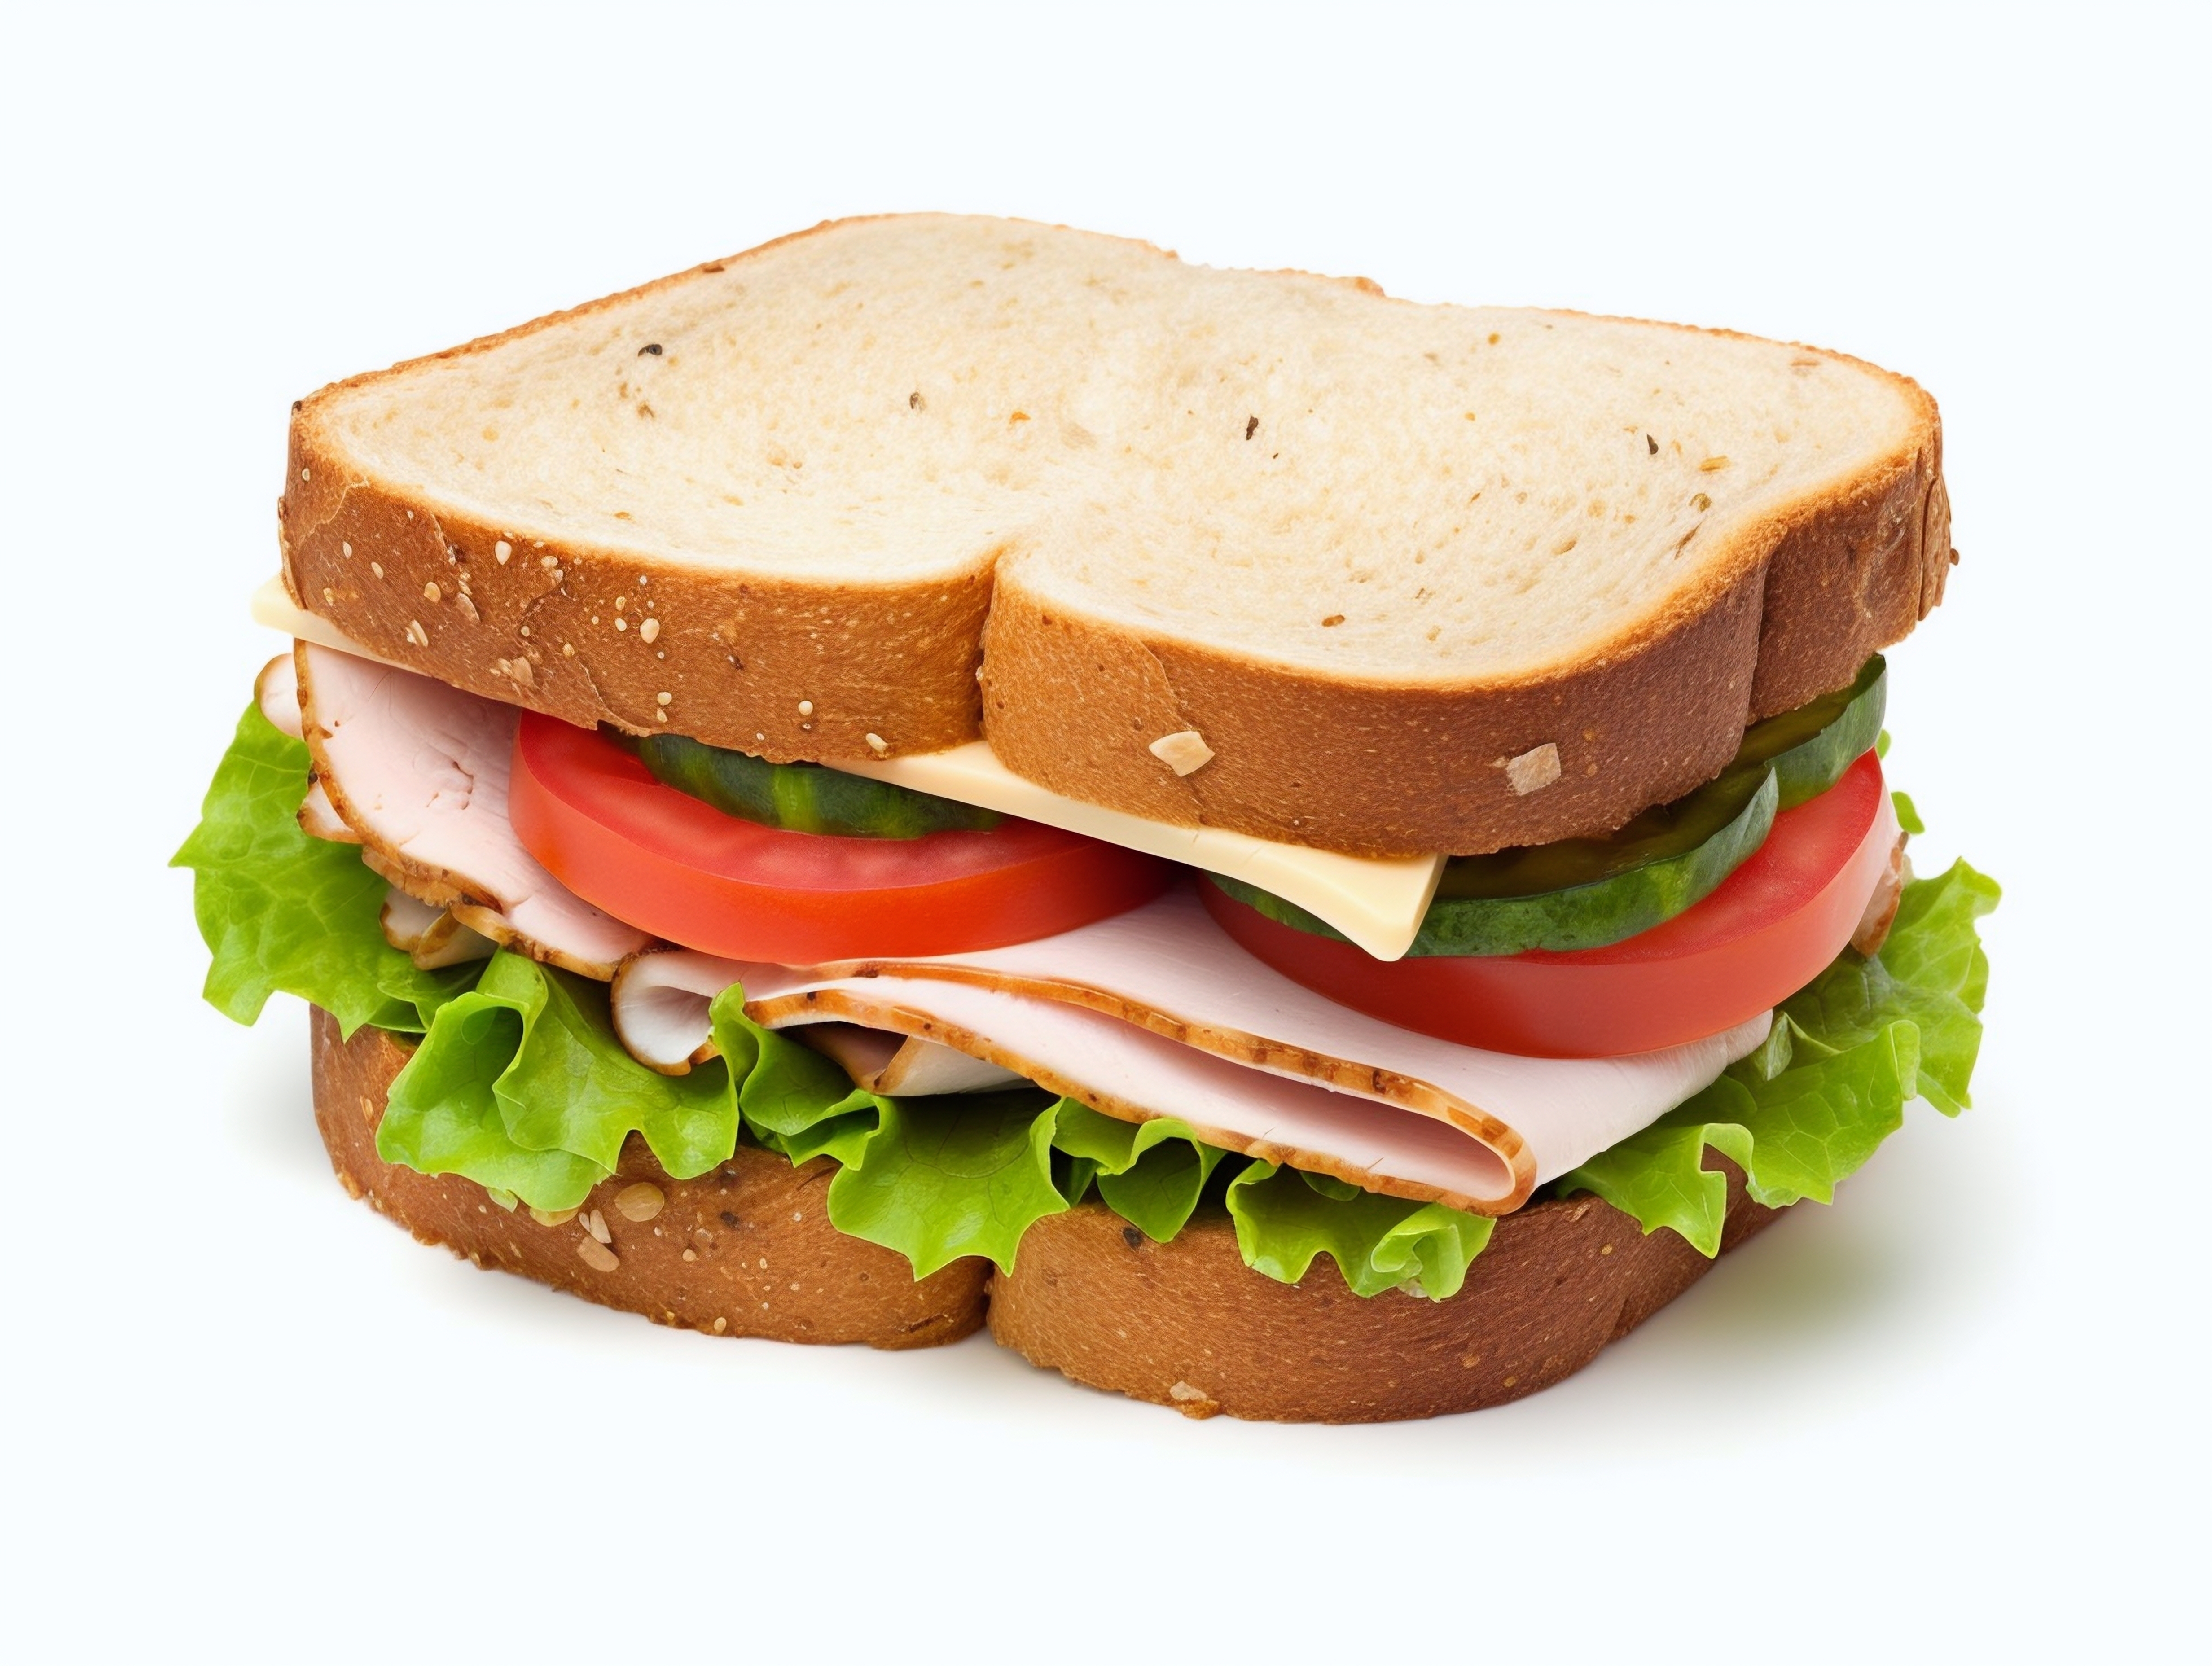 A ham, cheese, cucumber, and tomato sandwich | Source: Shutterstock